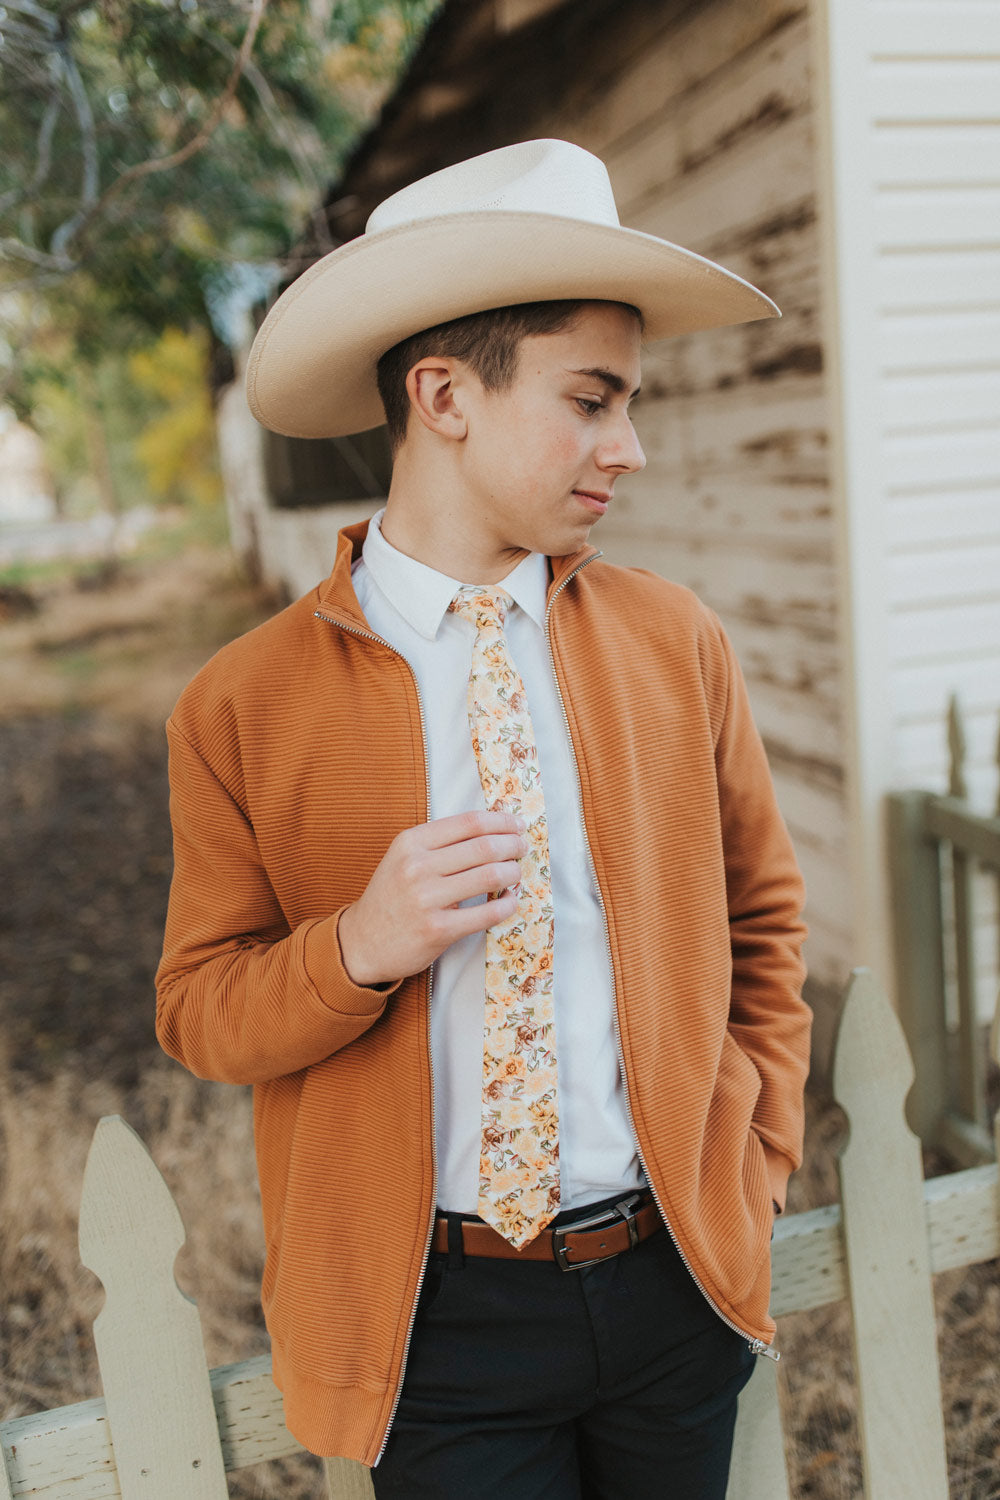 Autumn Cascade Tie worn with a white shirt, orange zip cardigan and black pants. Model is also wearing a cowboy hat.